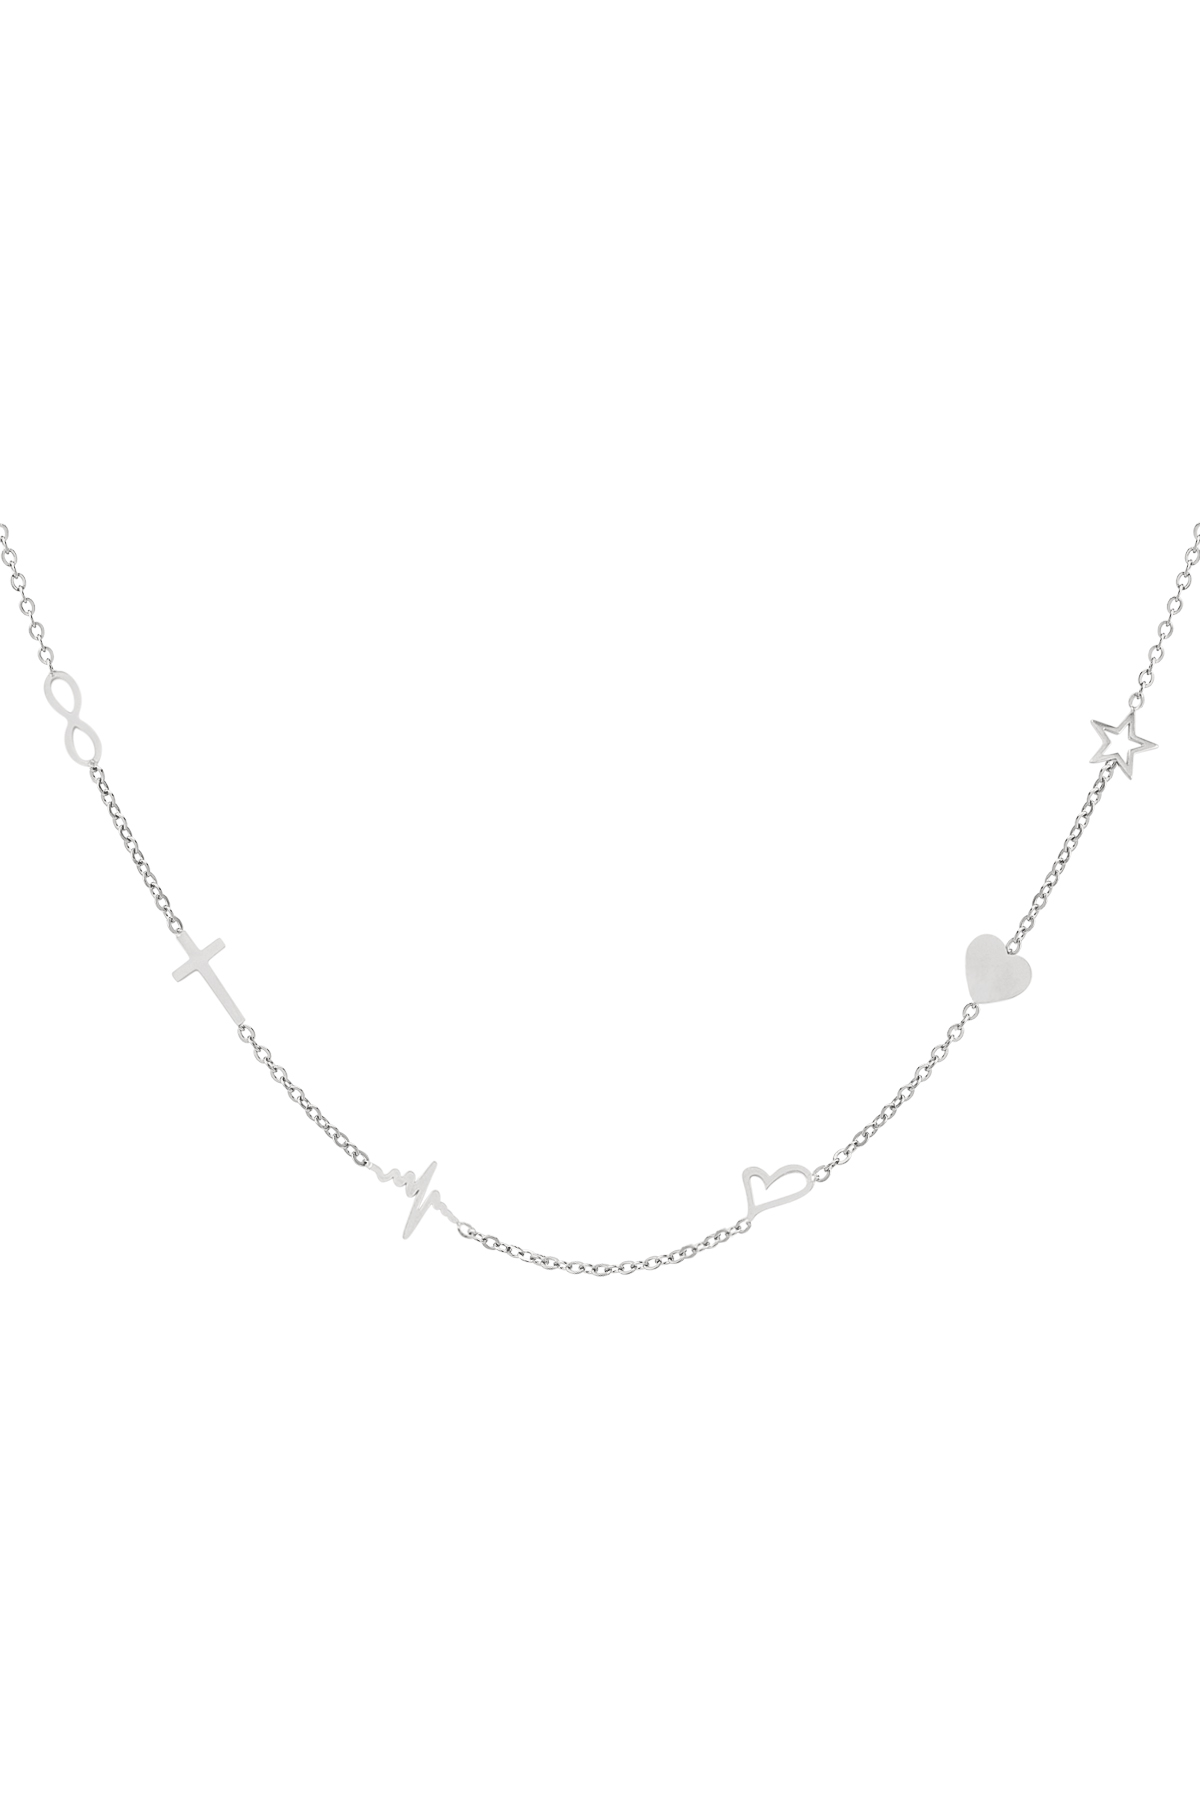 Necklace 6 charms - silver Stainless Steel h5 